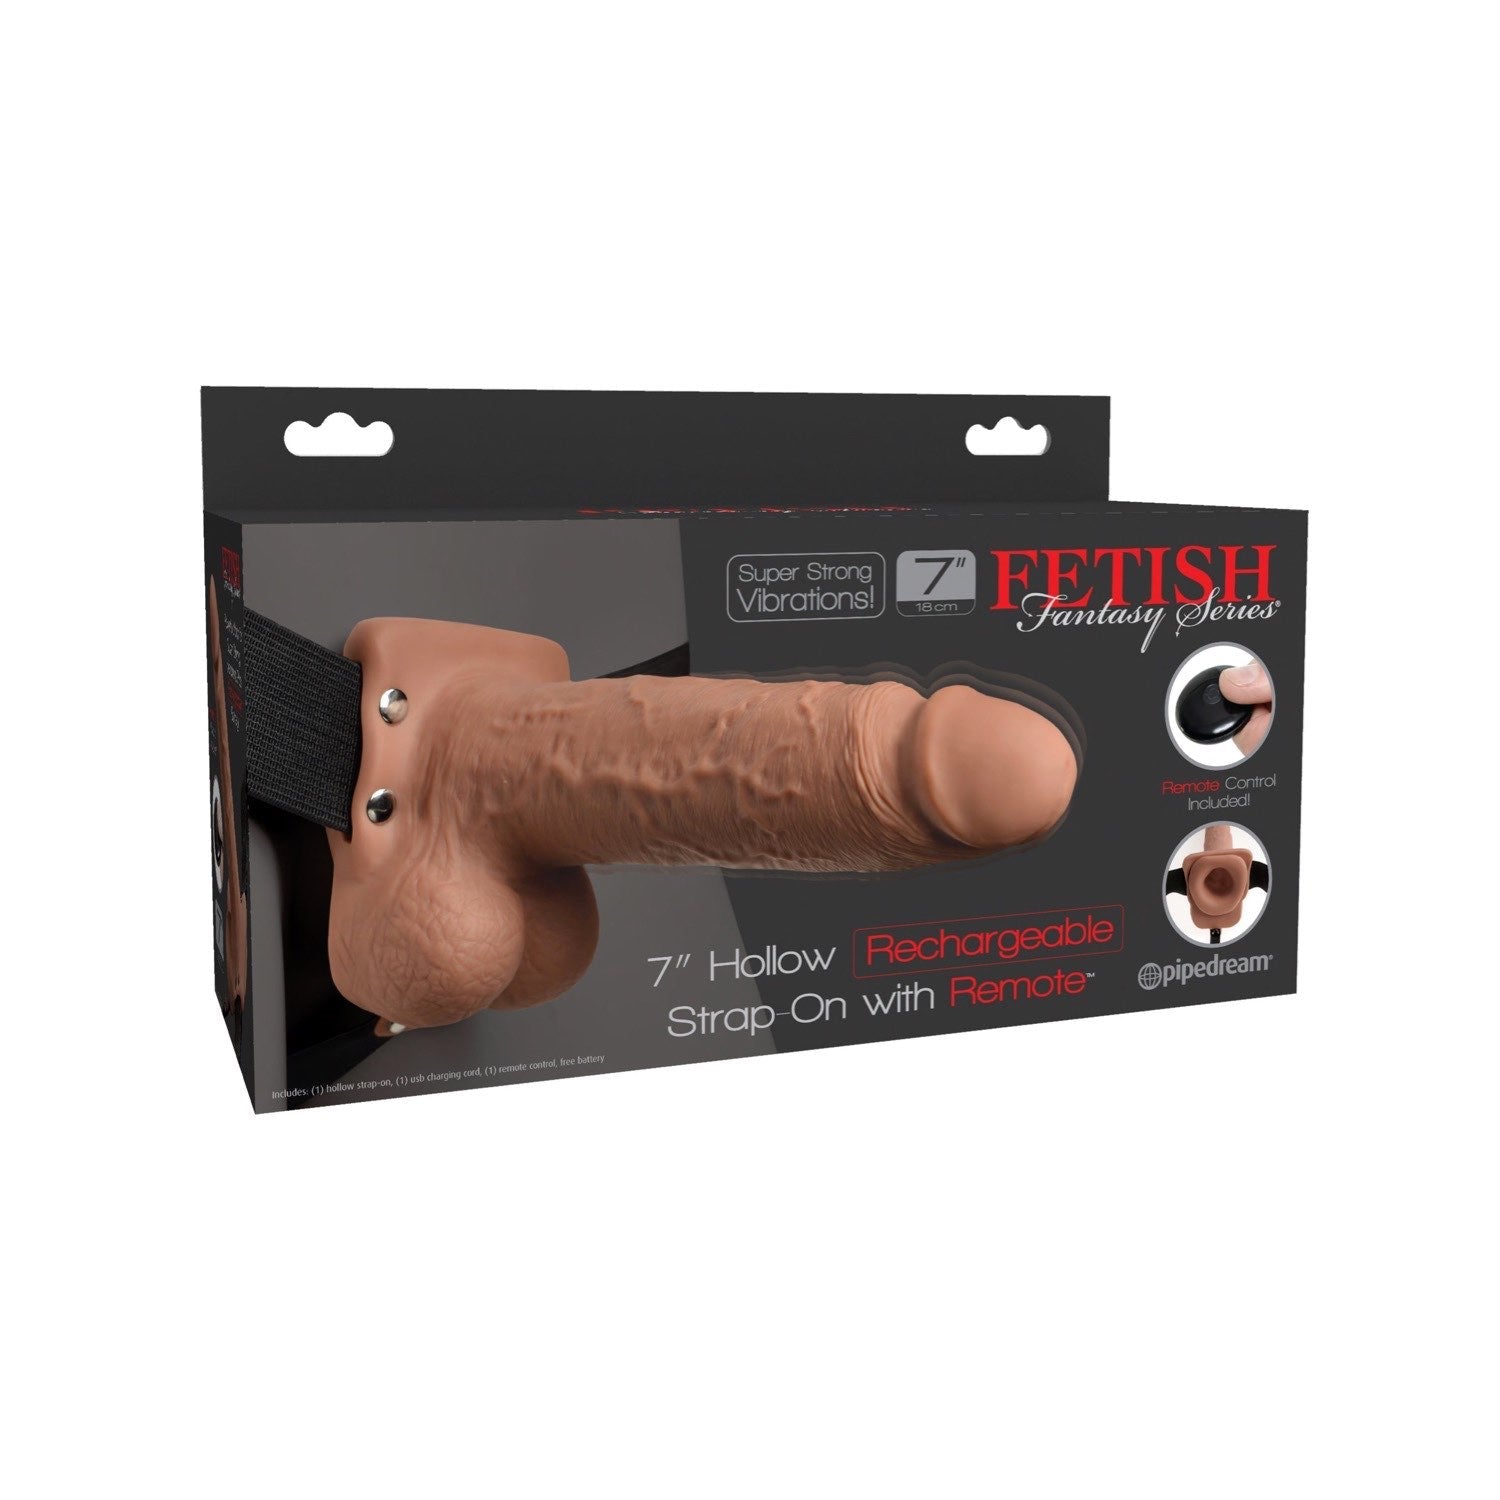 Fetish Fantasy Series 7&quot; Hollow Rechargeable Strap-On with Balls - Tan 17.8 cm Vibrating Hollow Strap-On by Pipedream